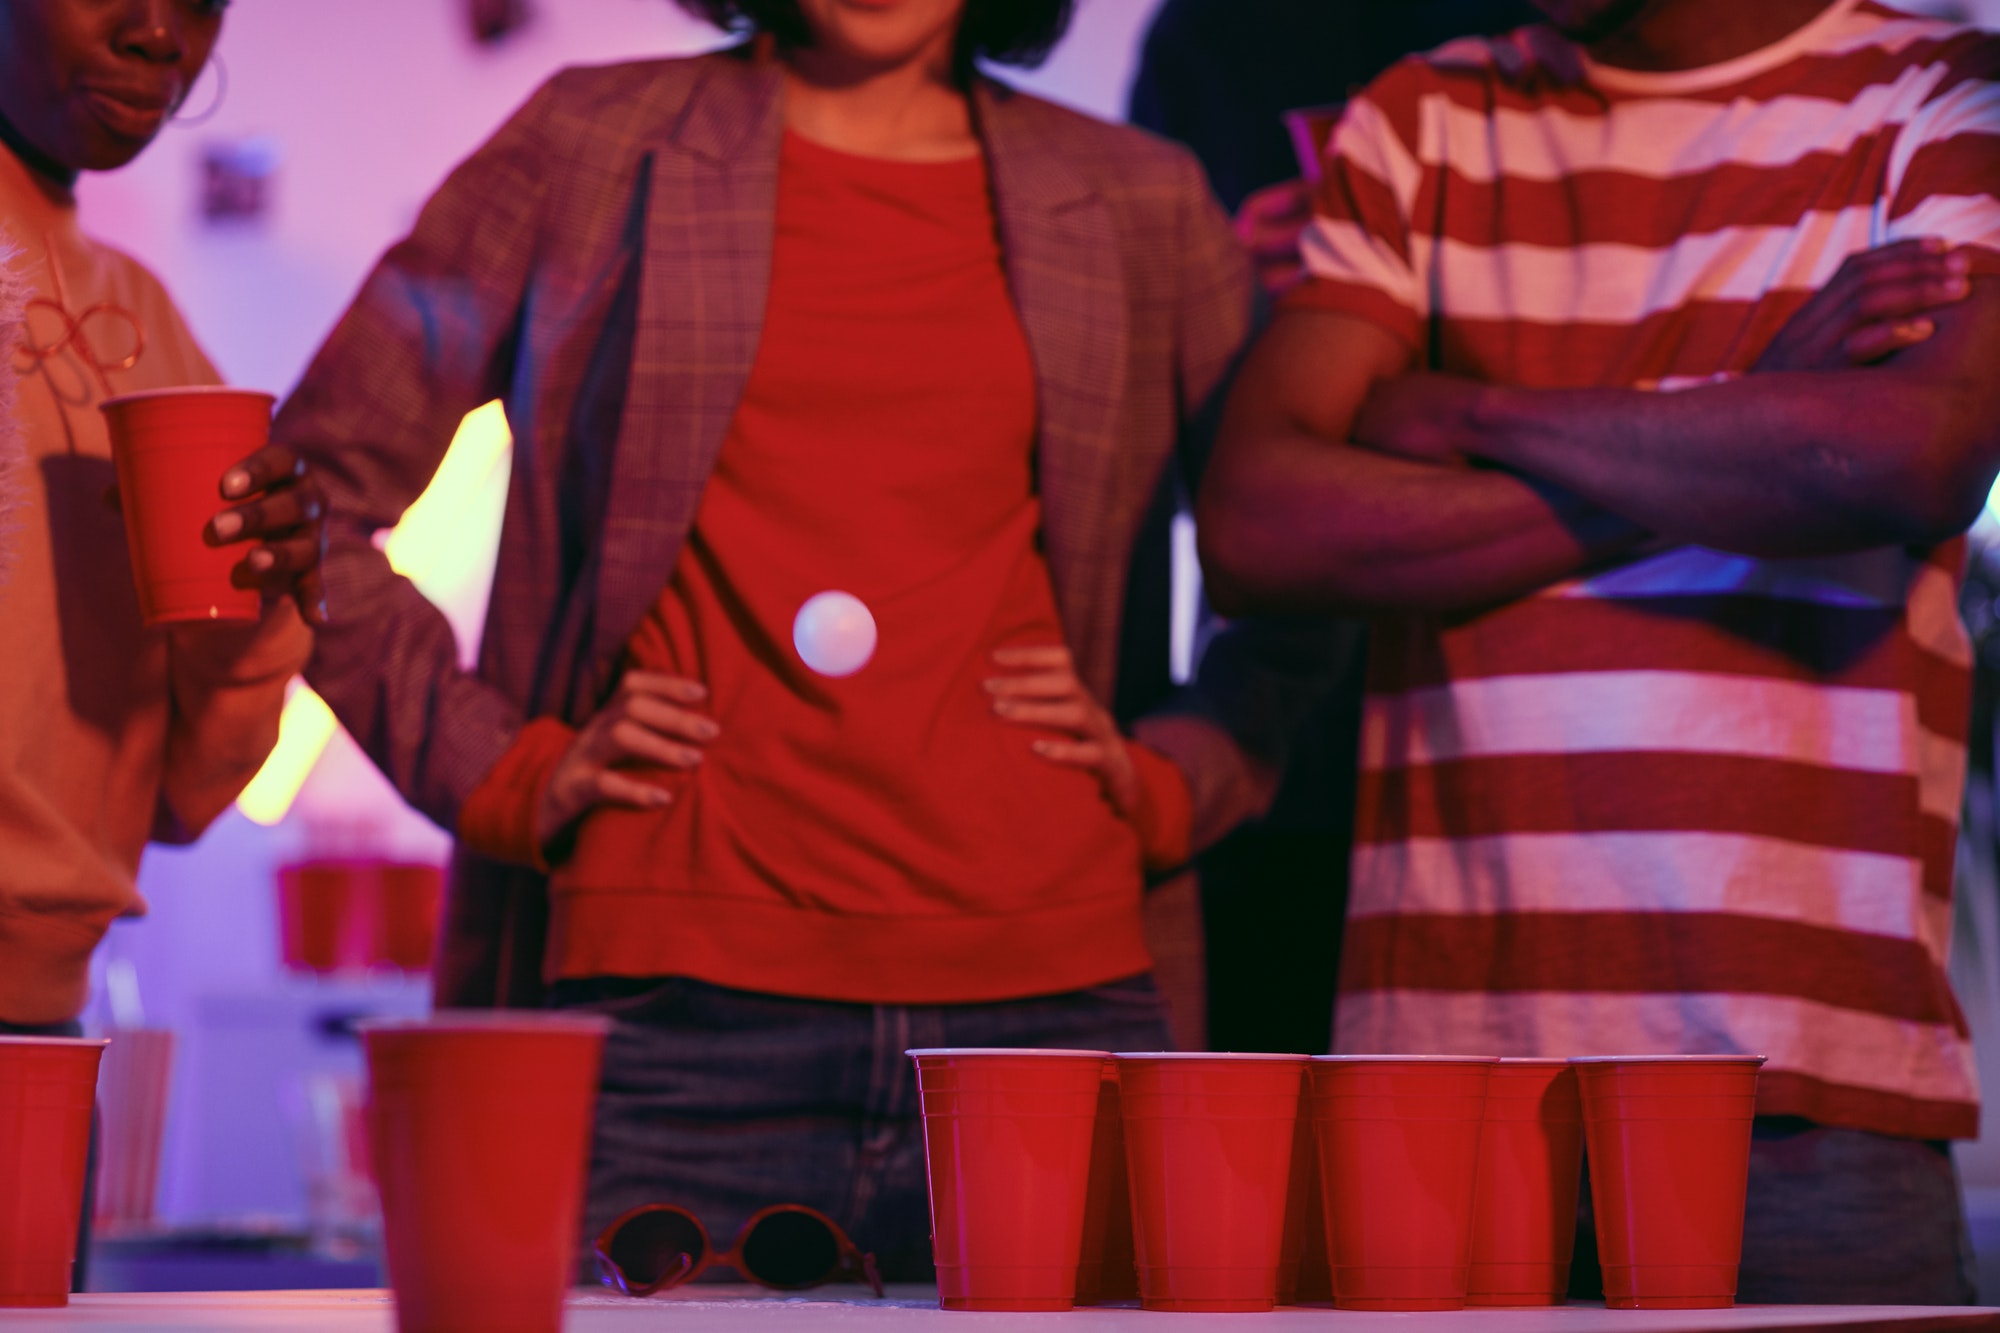 Beer pong game